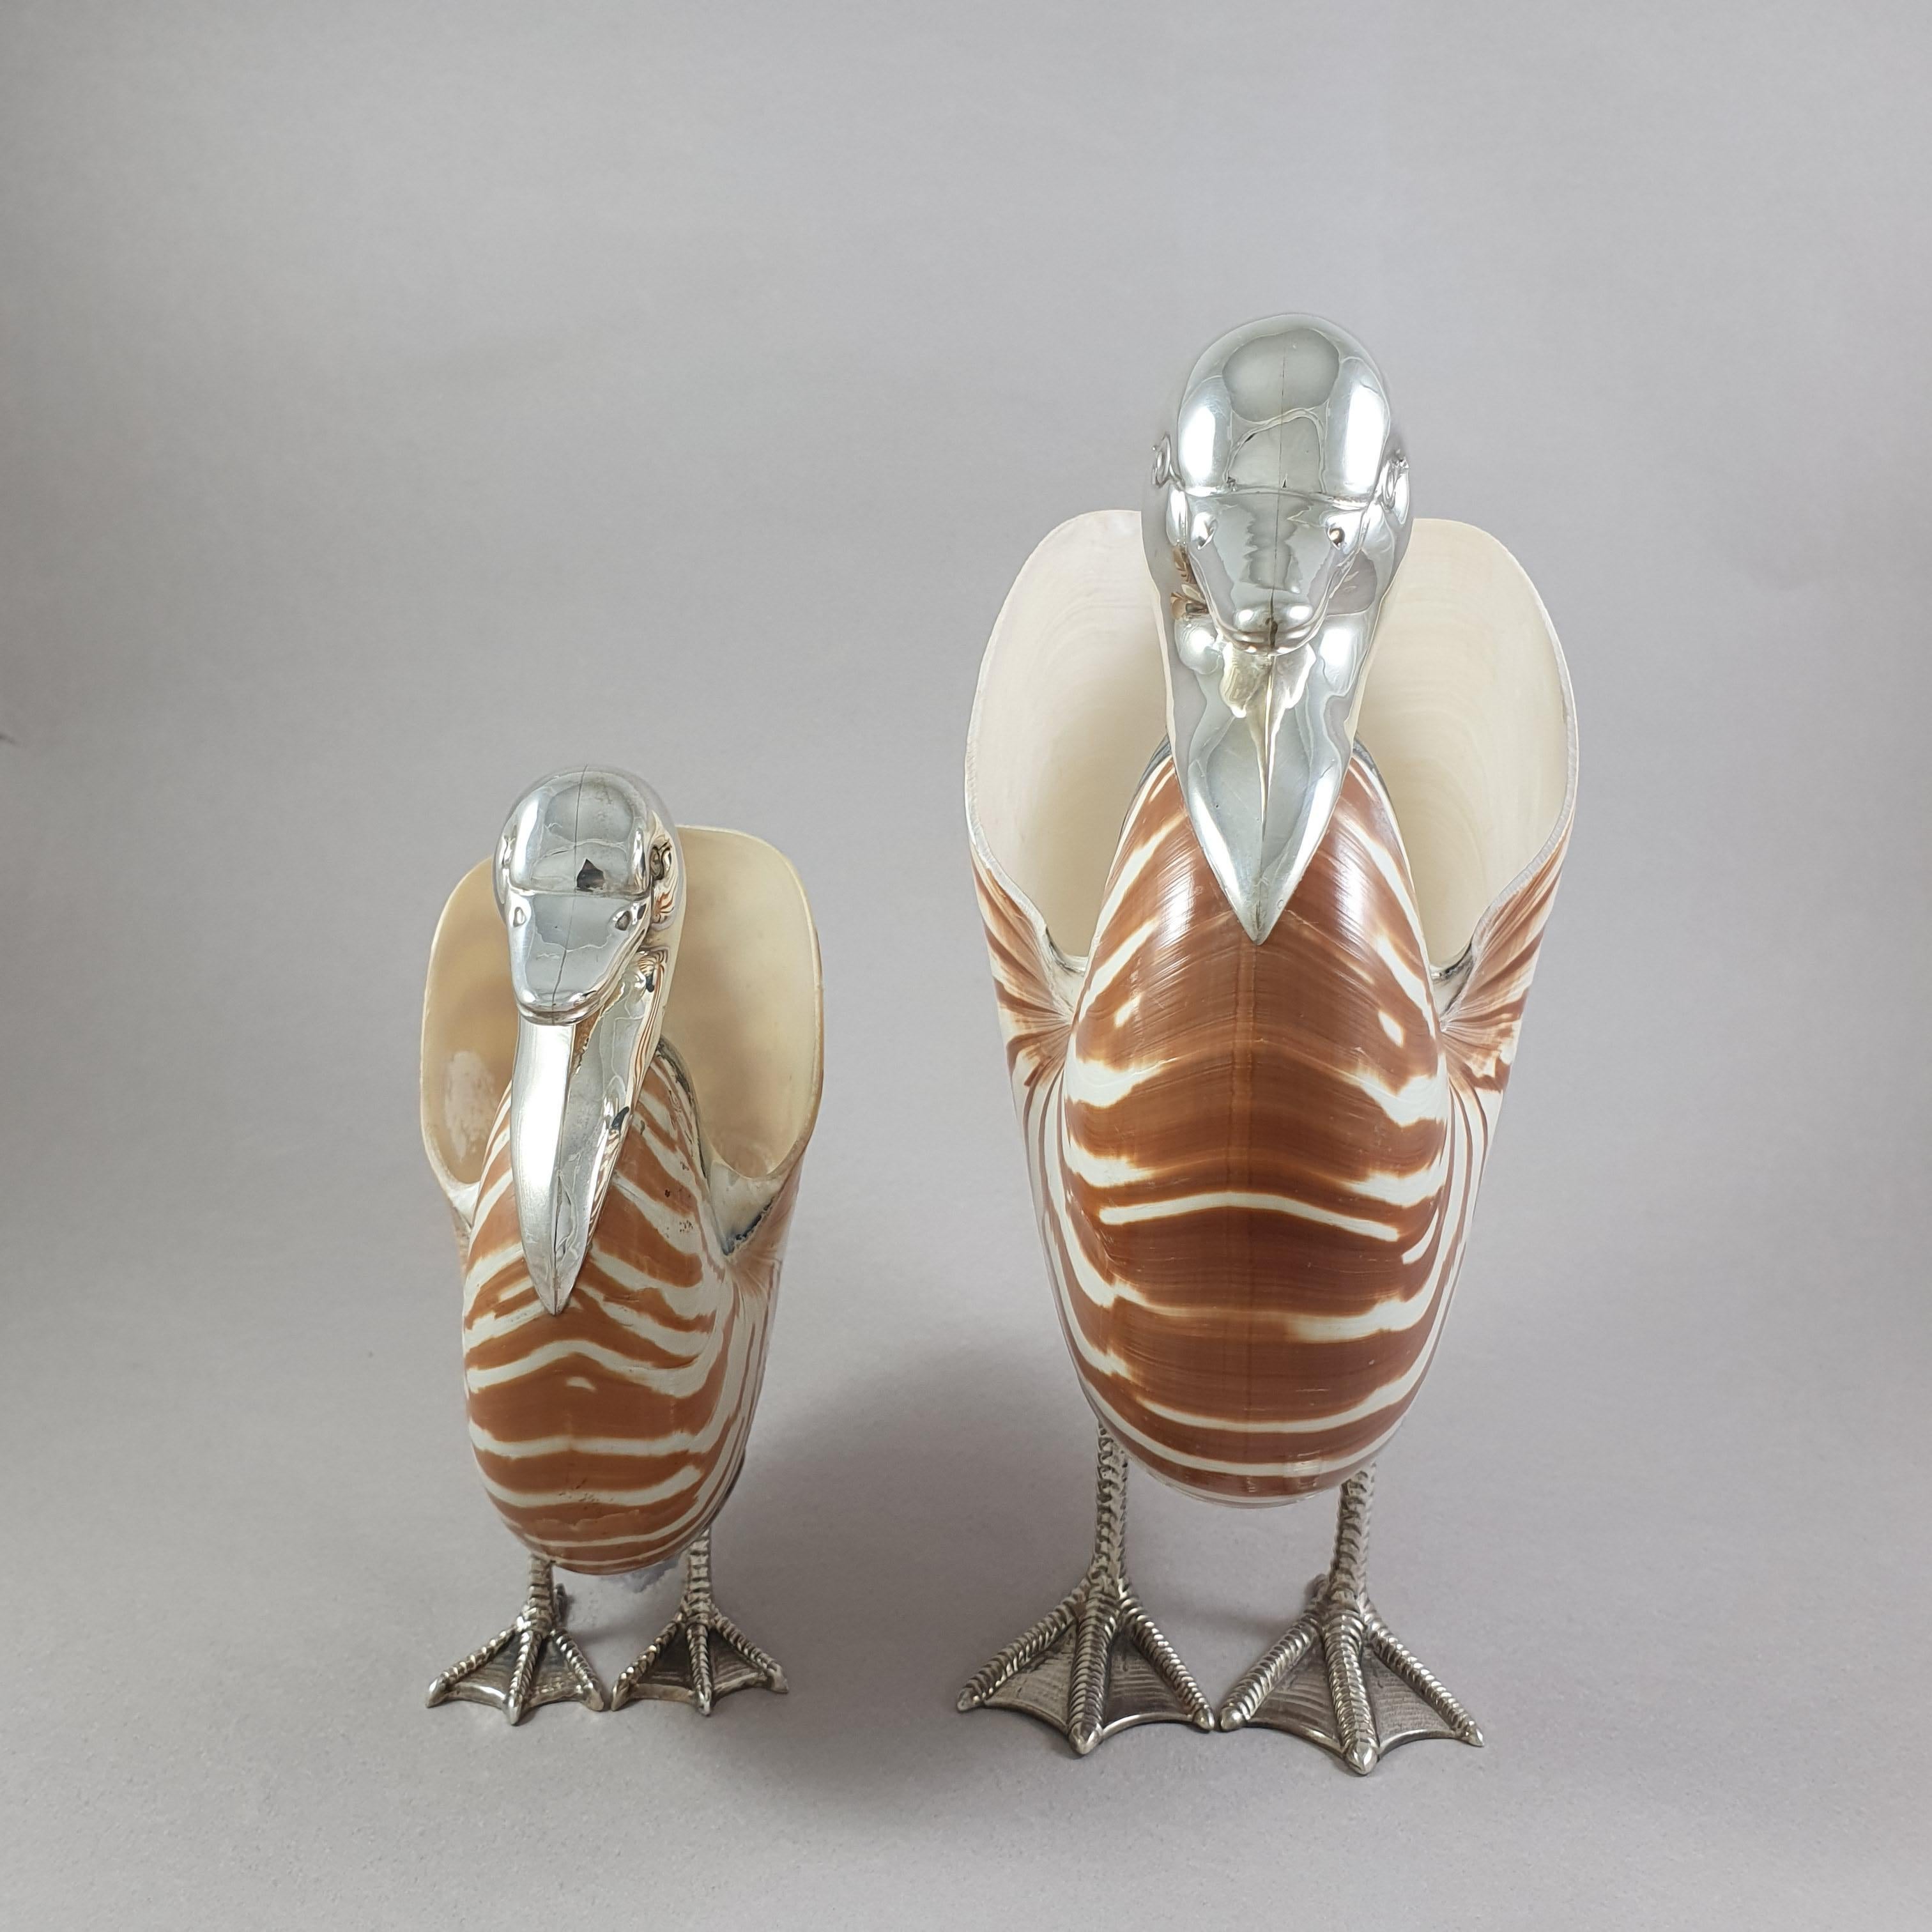 Two ducks in shell and sterling silver

20th century Portuguese work
925 silver hallmark

Big duck:
Height: 18cm - 7 inches
Length: 14cm - 5.5 inches
Width: 8.4cm - 3.3 inches 

Little duck:
Height: 12.6cm - 4.9 inches
Length: 10cm - 3.9